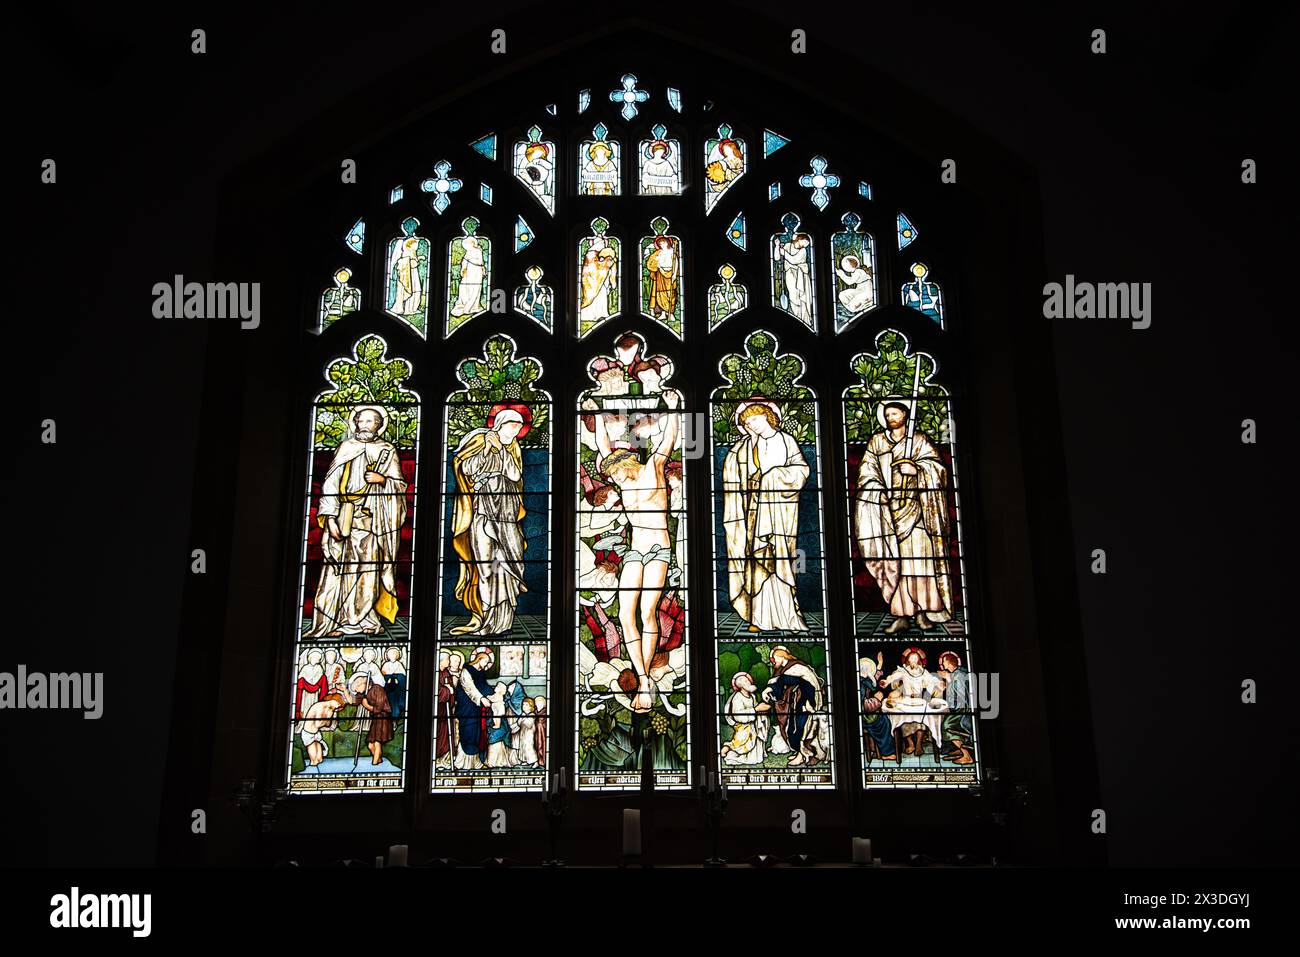 Stained glass window by William Morris, Edward Burne-Jones and Ford Madox Brown, Jesus Church, Troutbeck, Cumbria, England, United Kingdom Stock Photo